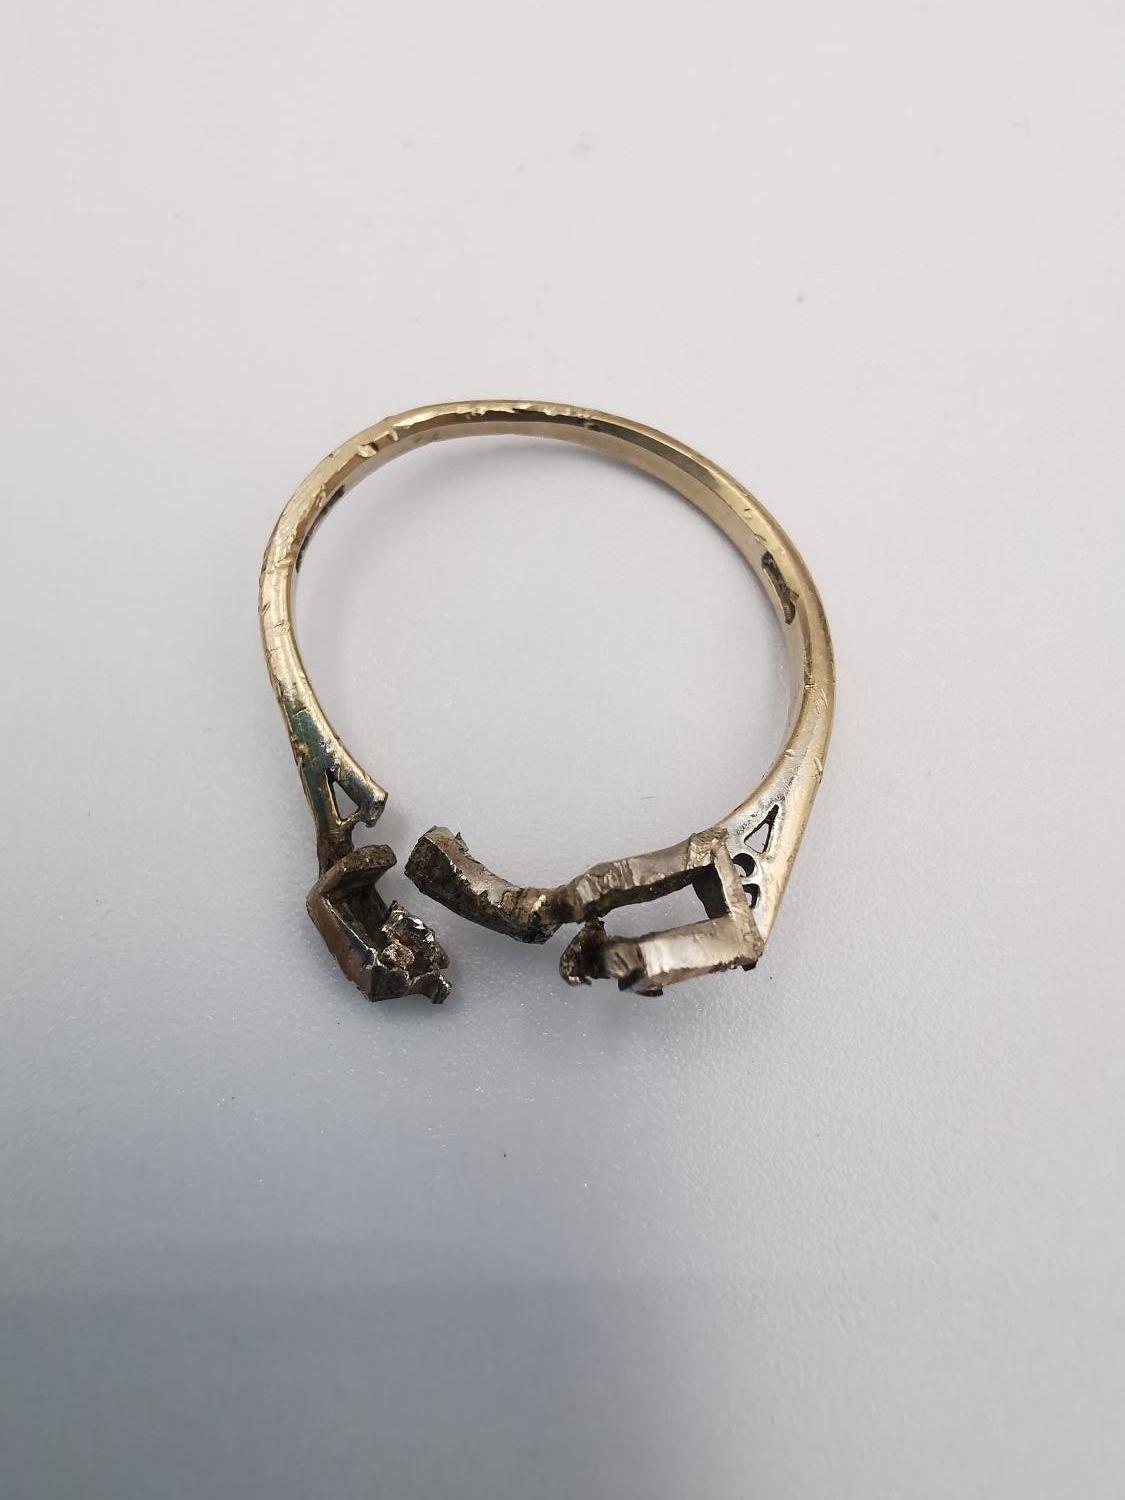 An 18ct yellow gold ring shank. Hallmarked: 18ct,750. (Stones have been removed and top is damaged). - Image 2 of 2